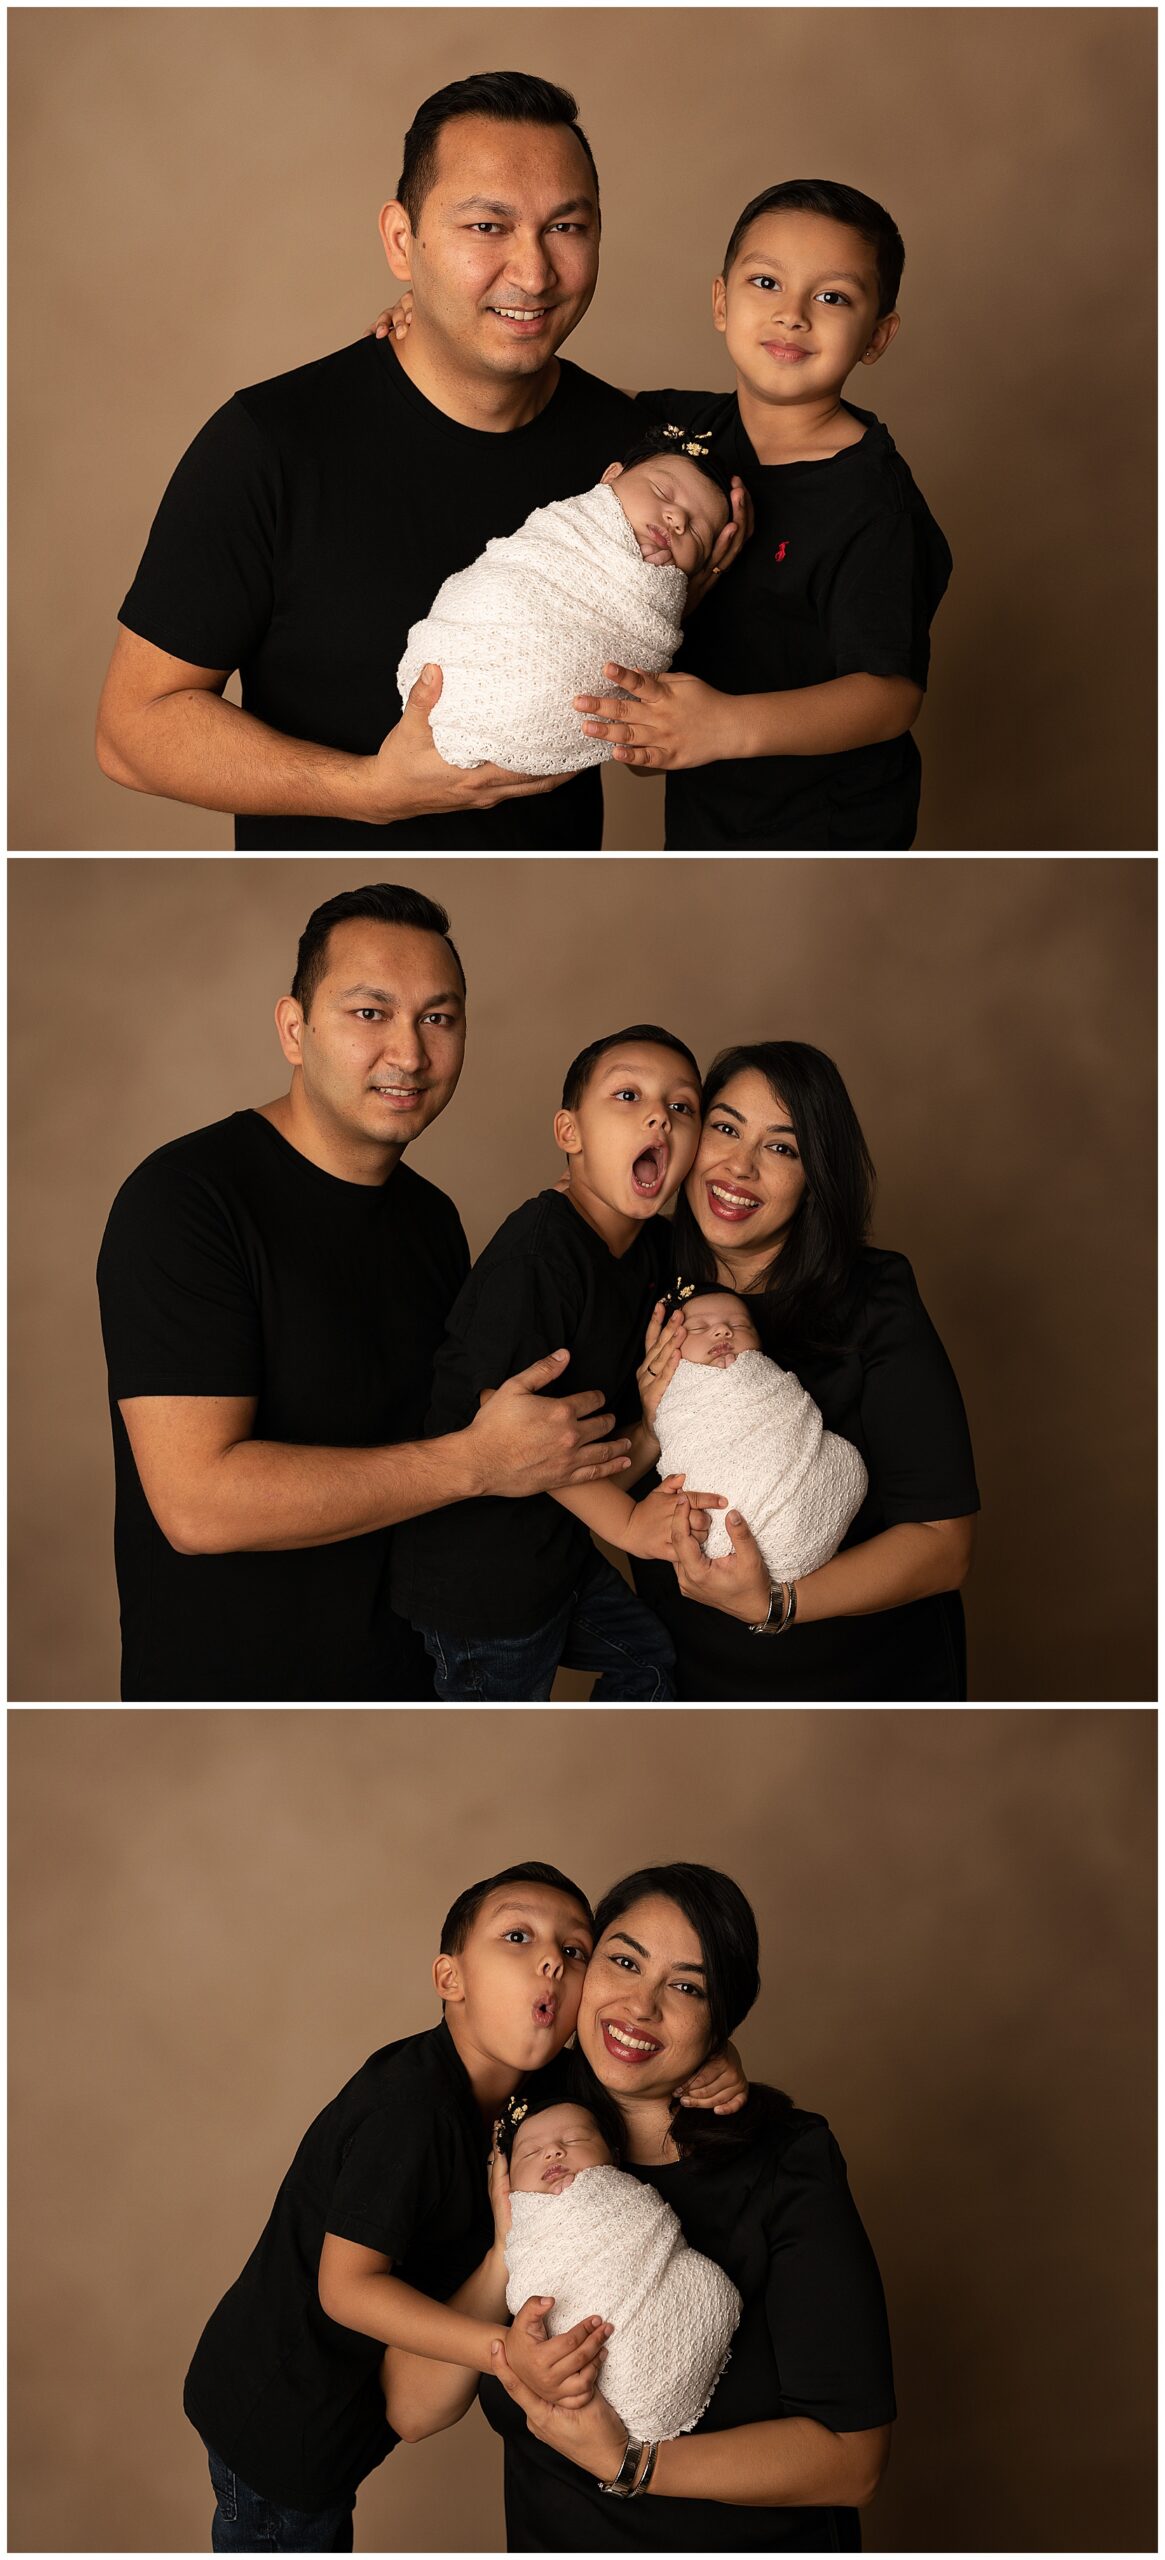 Three newborn family photos: top photo features dad, small son, and newborn swaddled in a white cloth. The middle photo features Dad, young son making goofy face, mom, and newborn swaddled in white. Bottom photo features young son making a goofy face, mom, and newborn swaddled in white. 